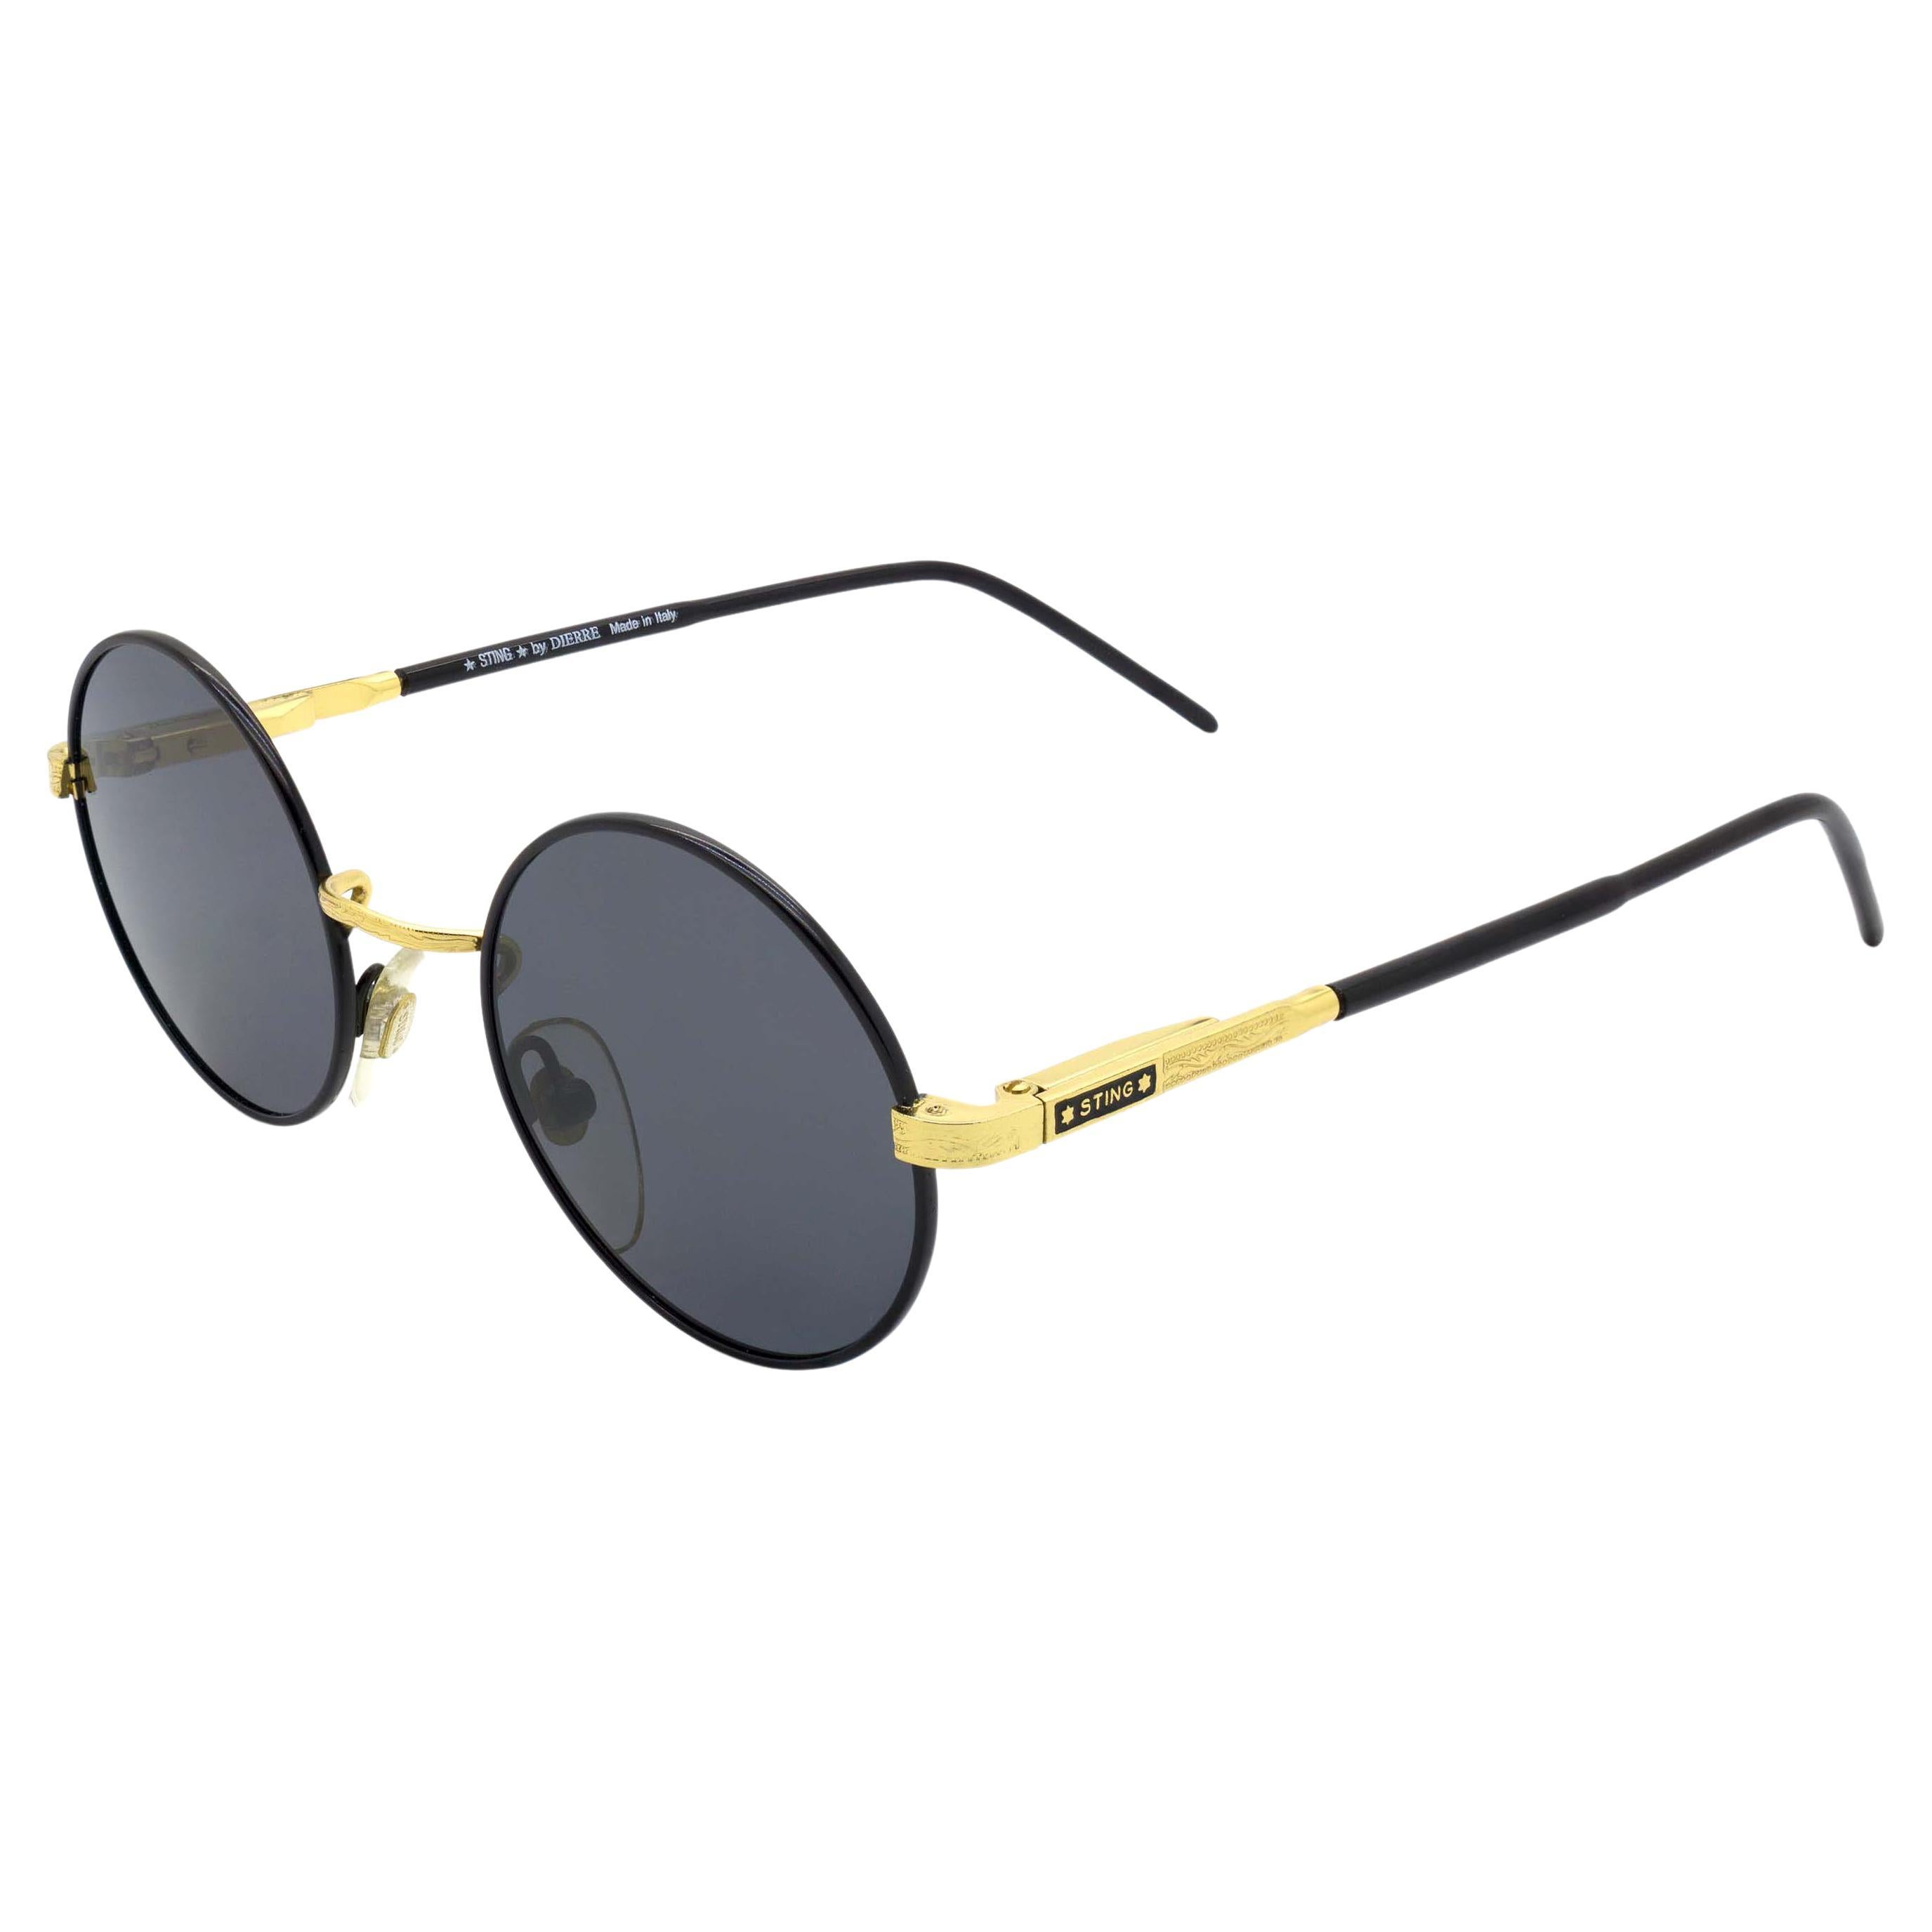 Sting round vintage sunglasses, Italy For Sale at 1stDibs